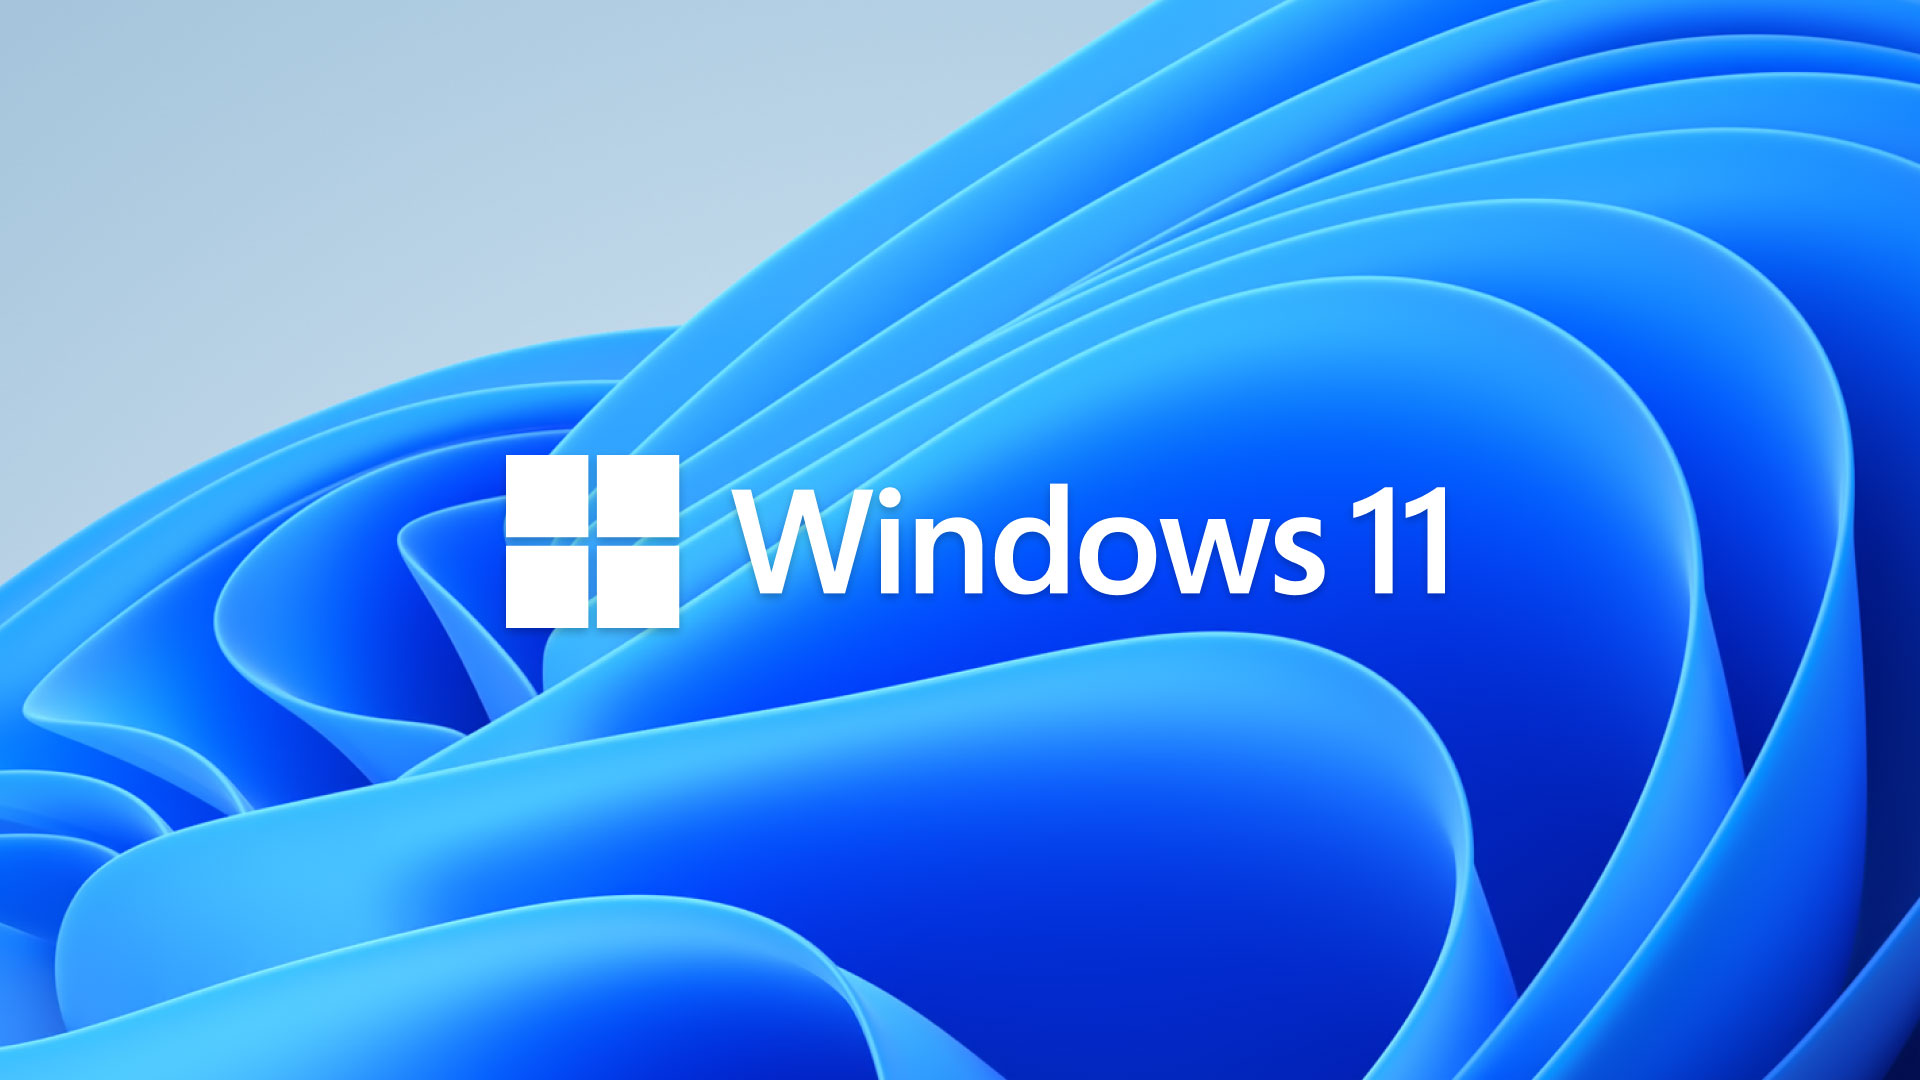 Microsoft Adding New Security Features to Windows 11 – Source: www.securityweek.com